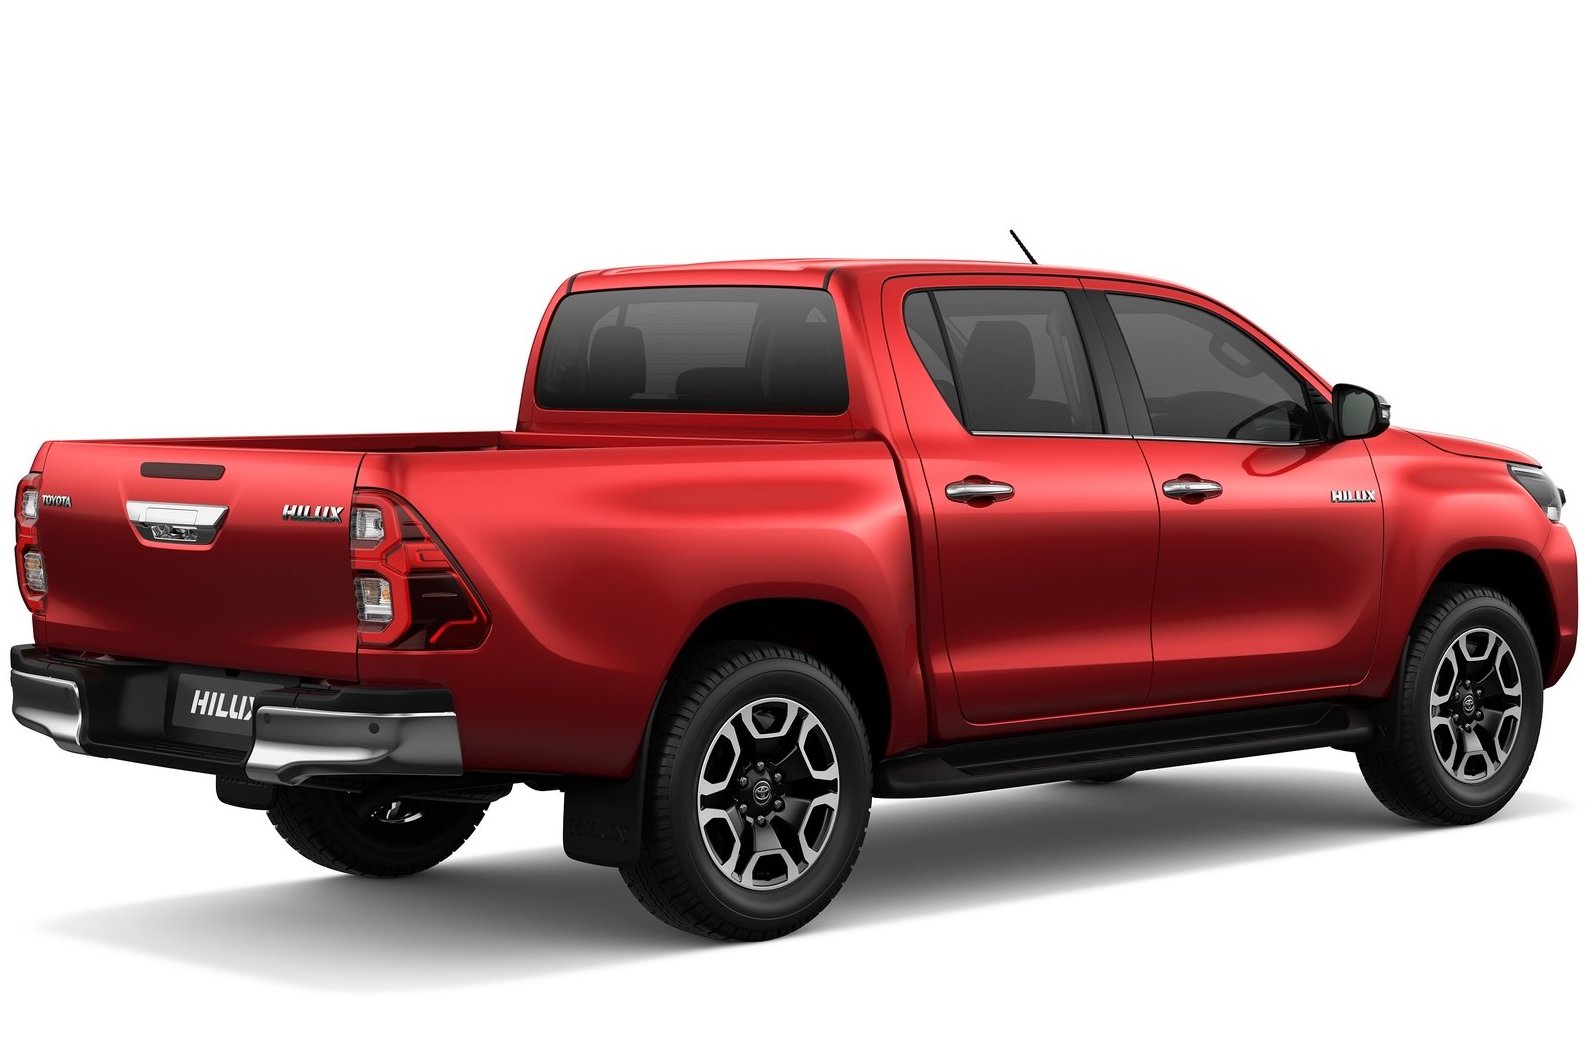 2021 Toyota Hilux facelift 